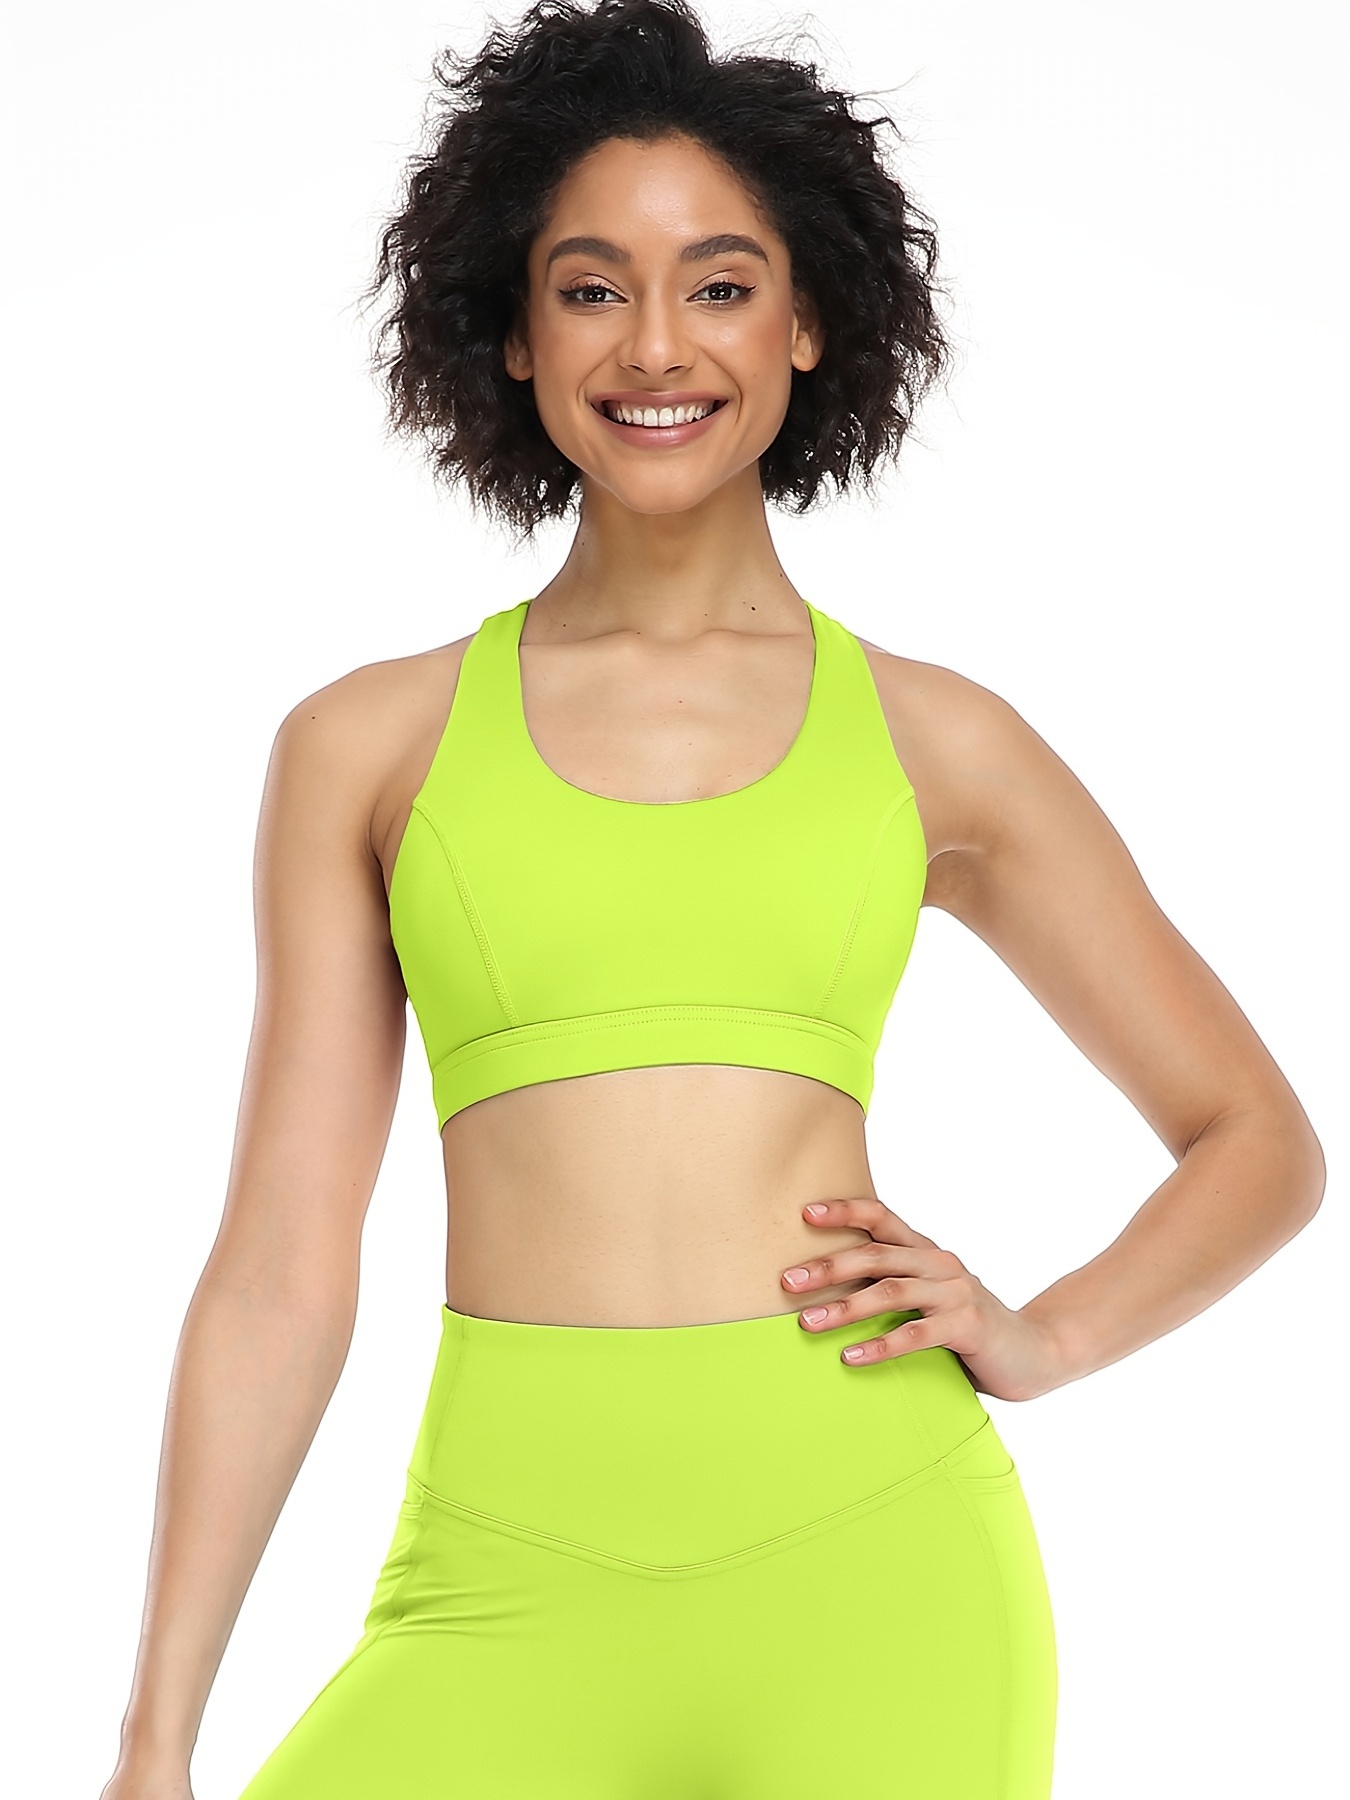 Professional Women's Sports Bra, Breathable and Quick Dry, Neon